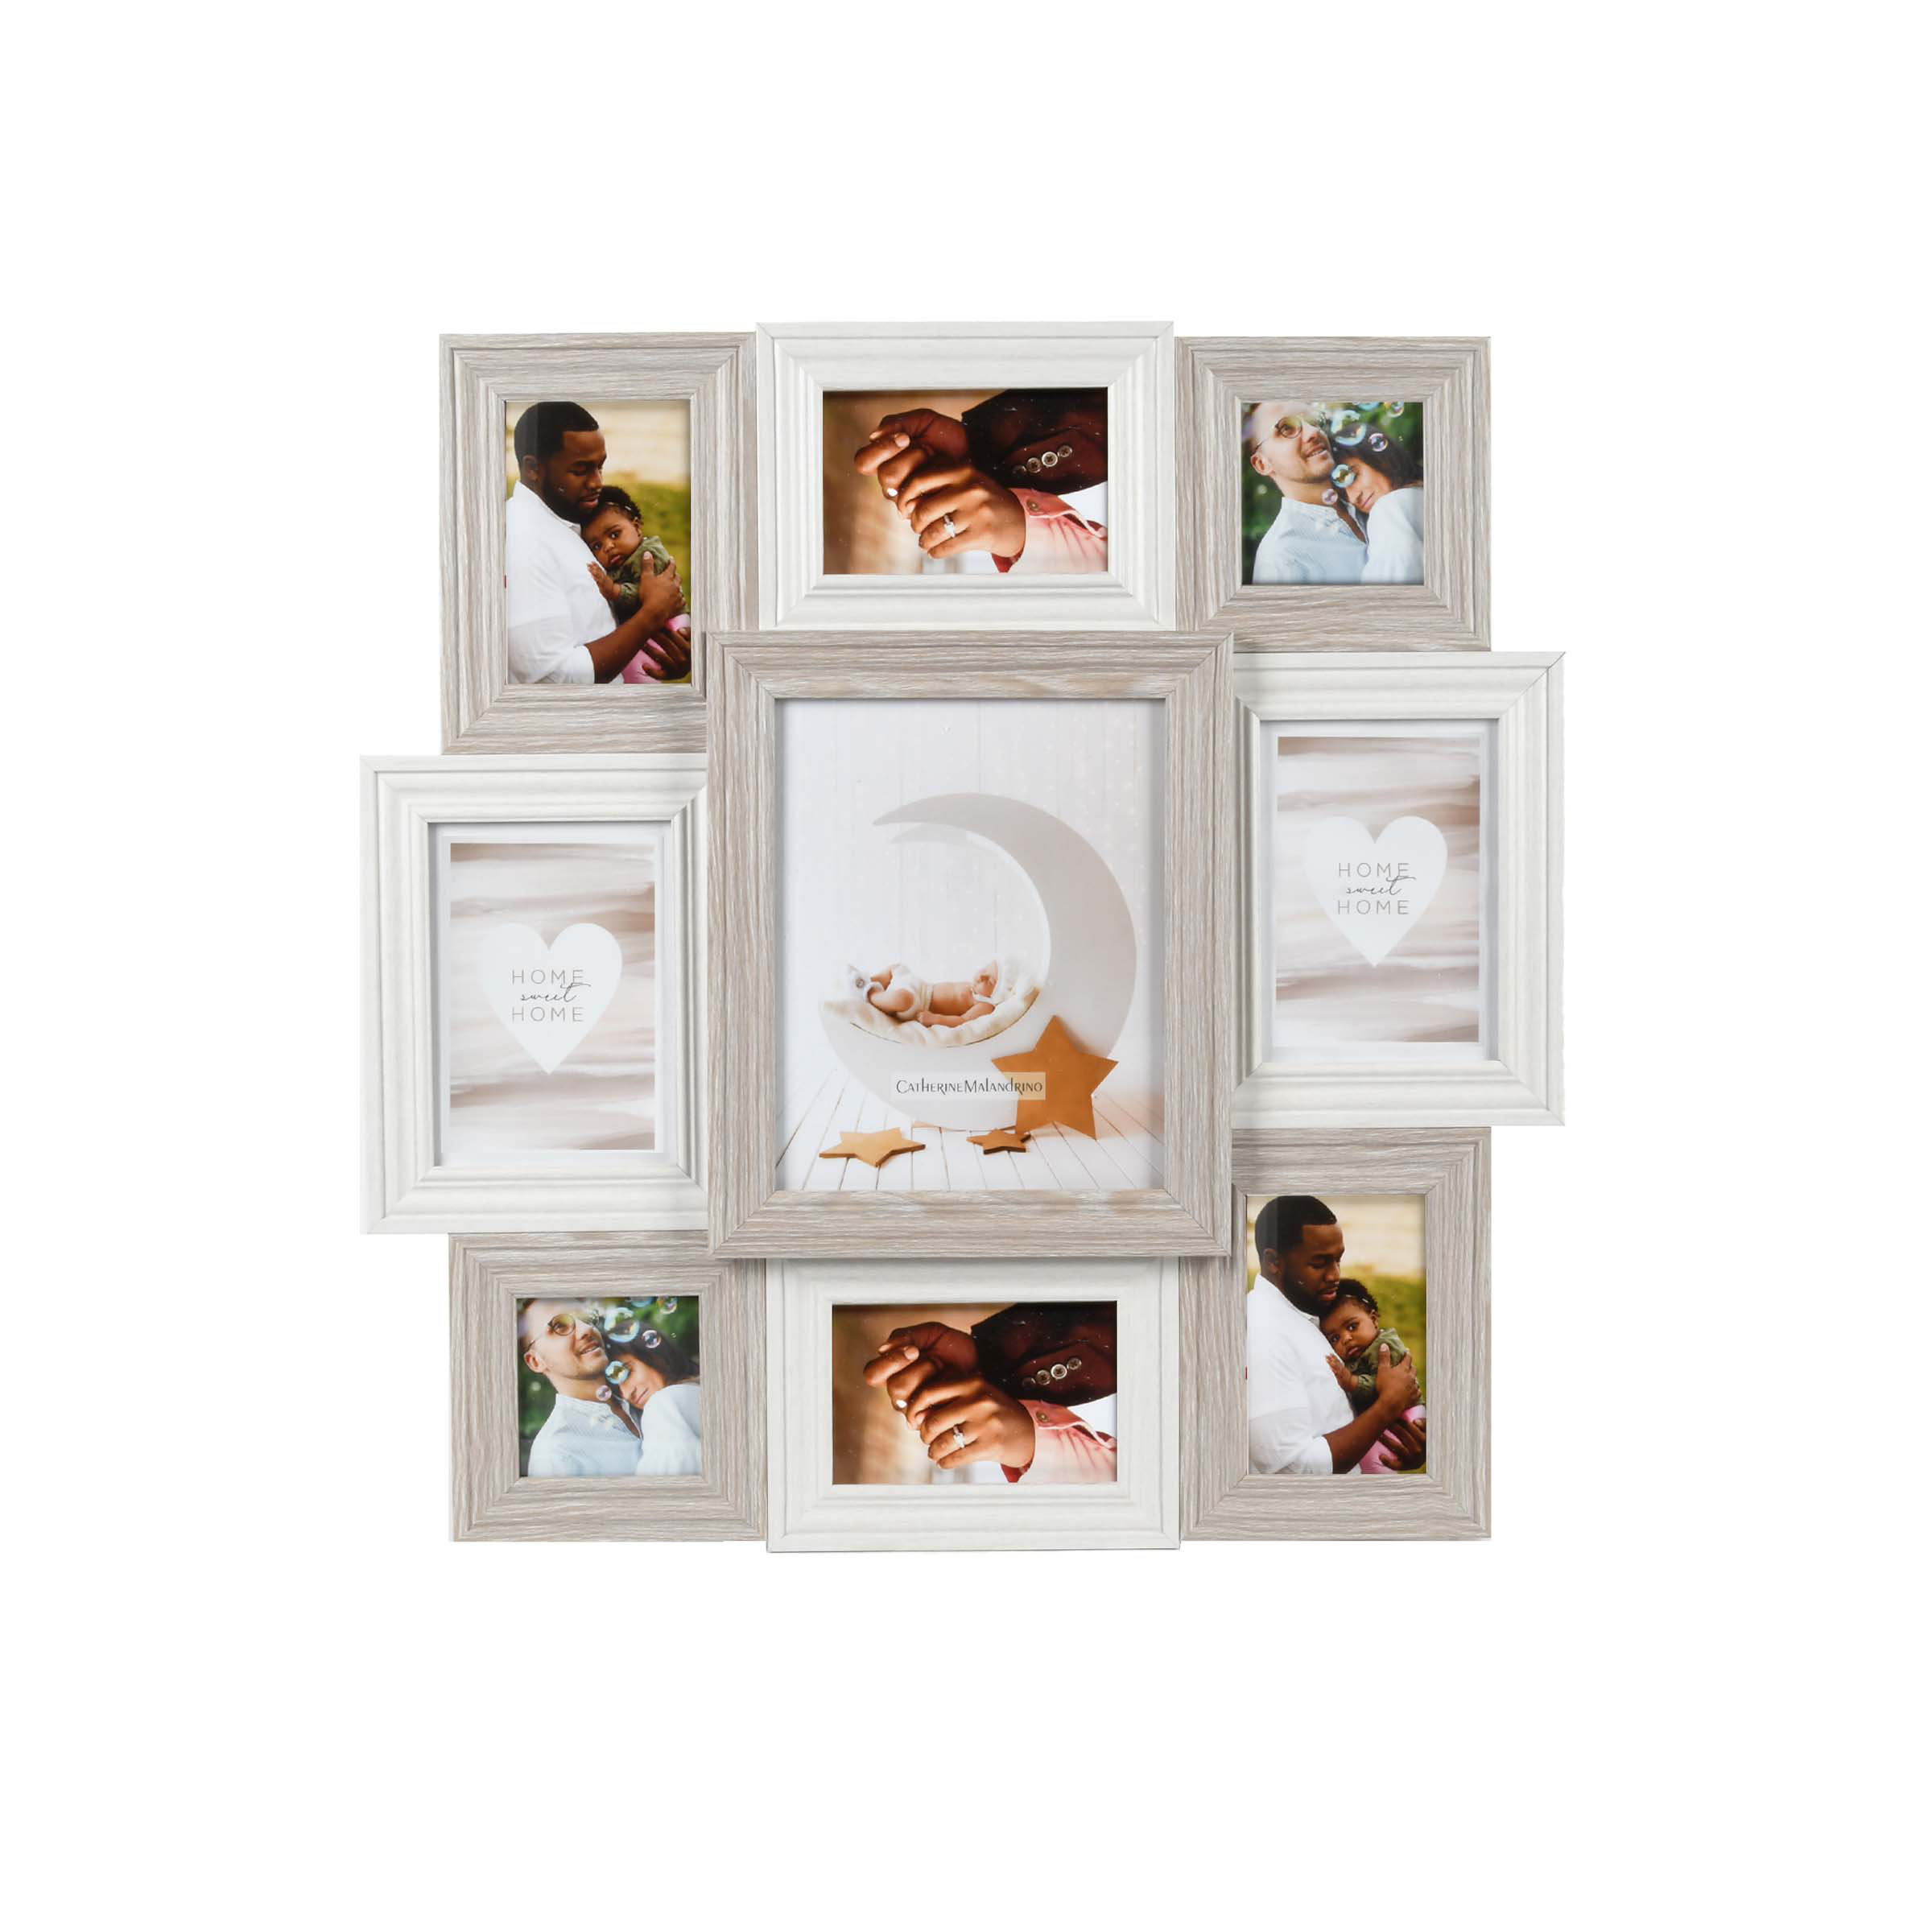 Multi Opening 4X6 Barnwood Panel Collage Picture Frame, Rustic